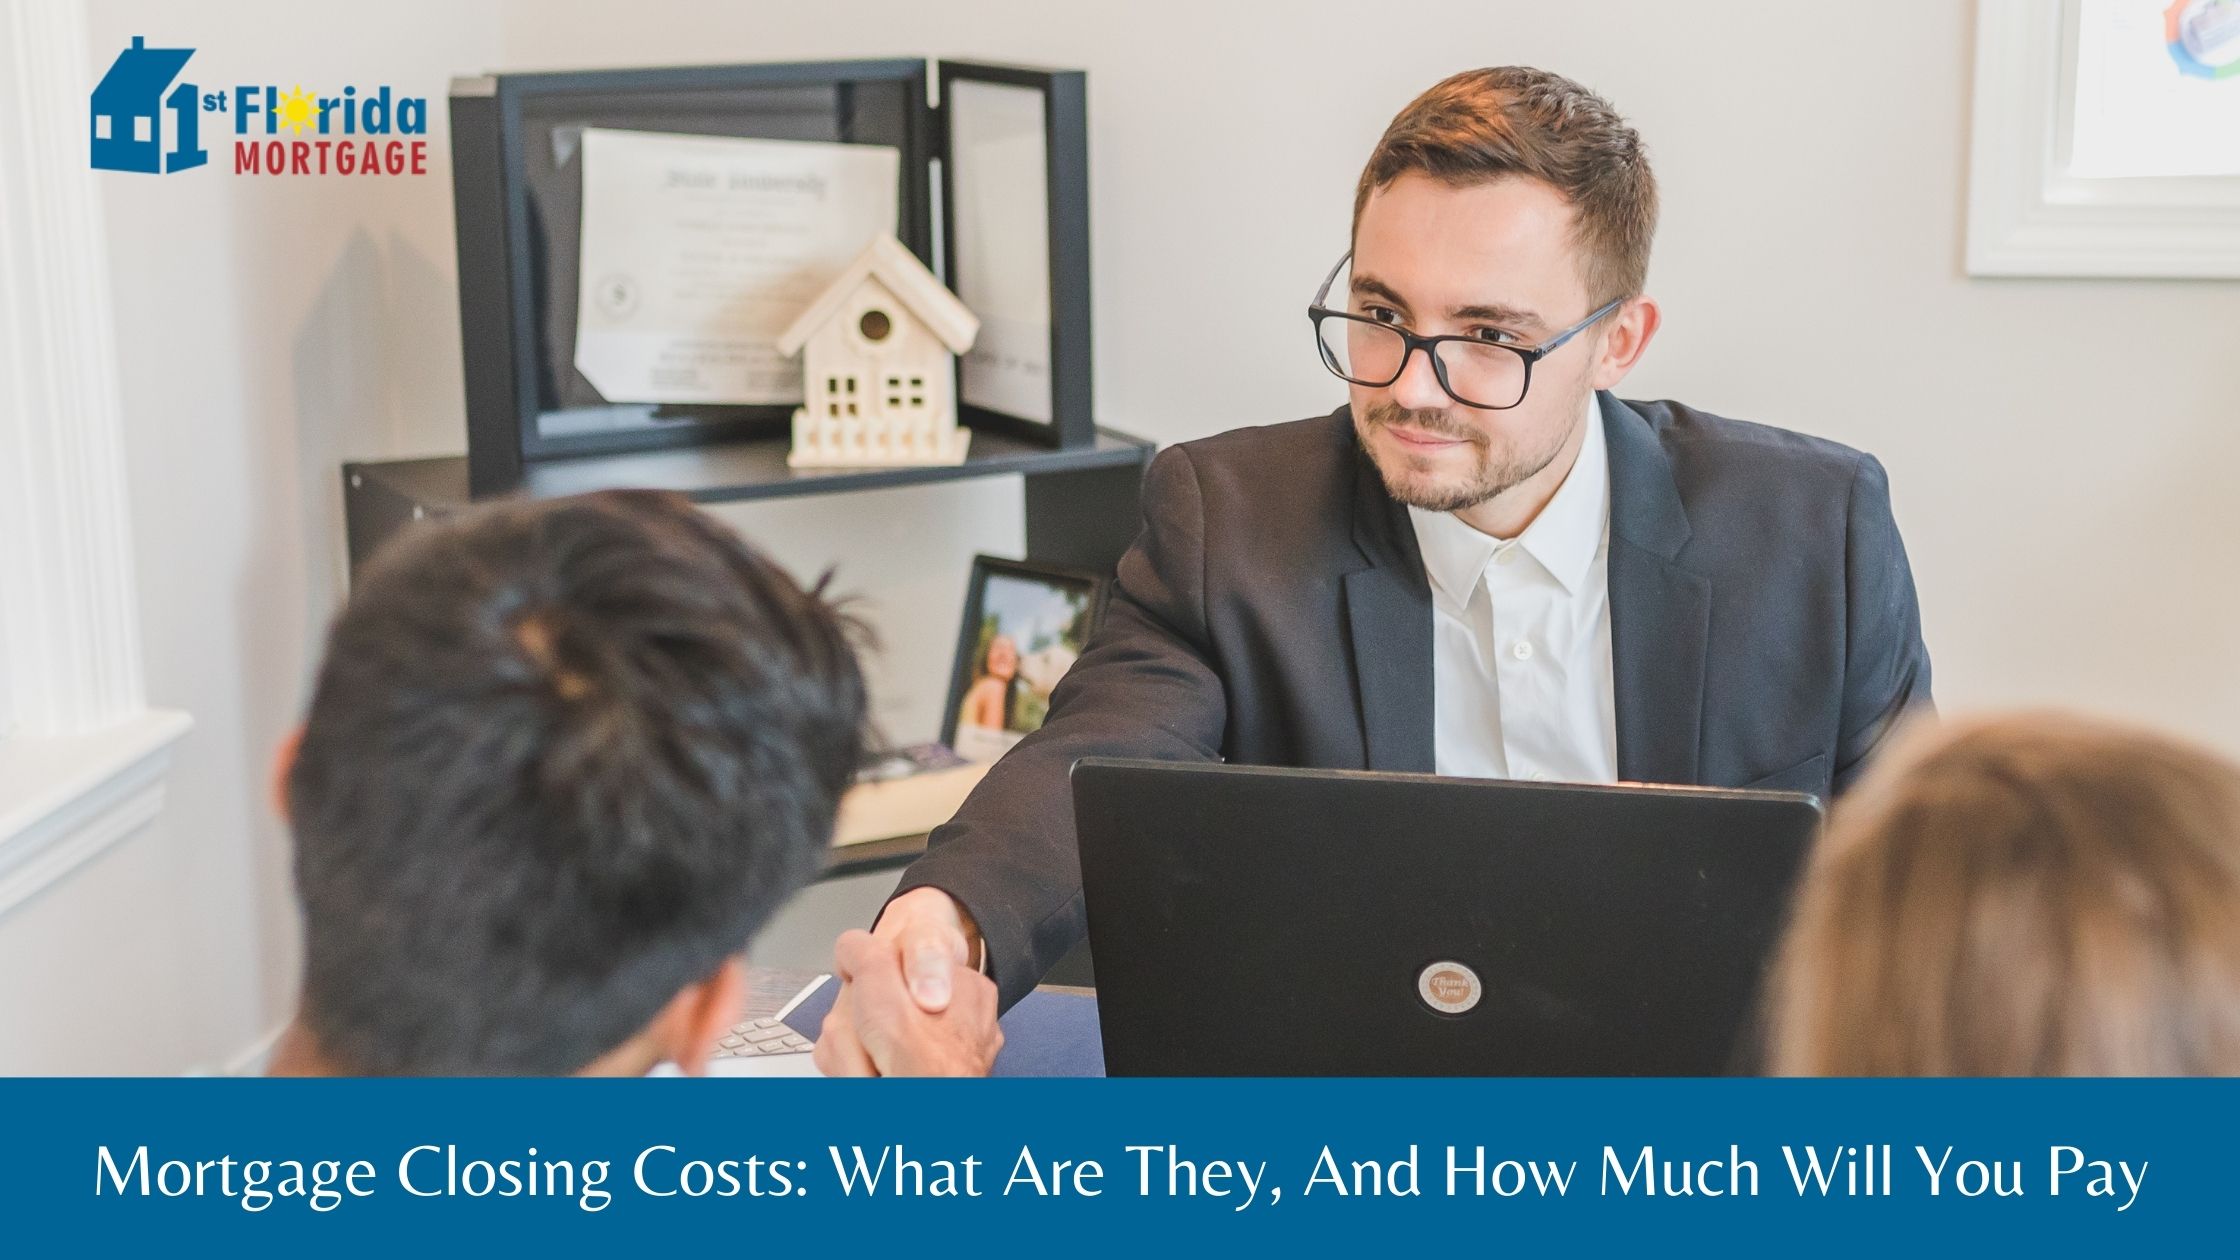 Mortgage Closing Costs: What Are They, And How Much Will You Pay